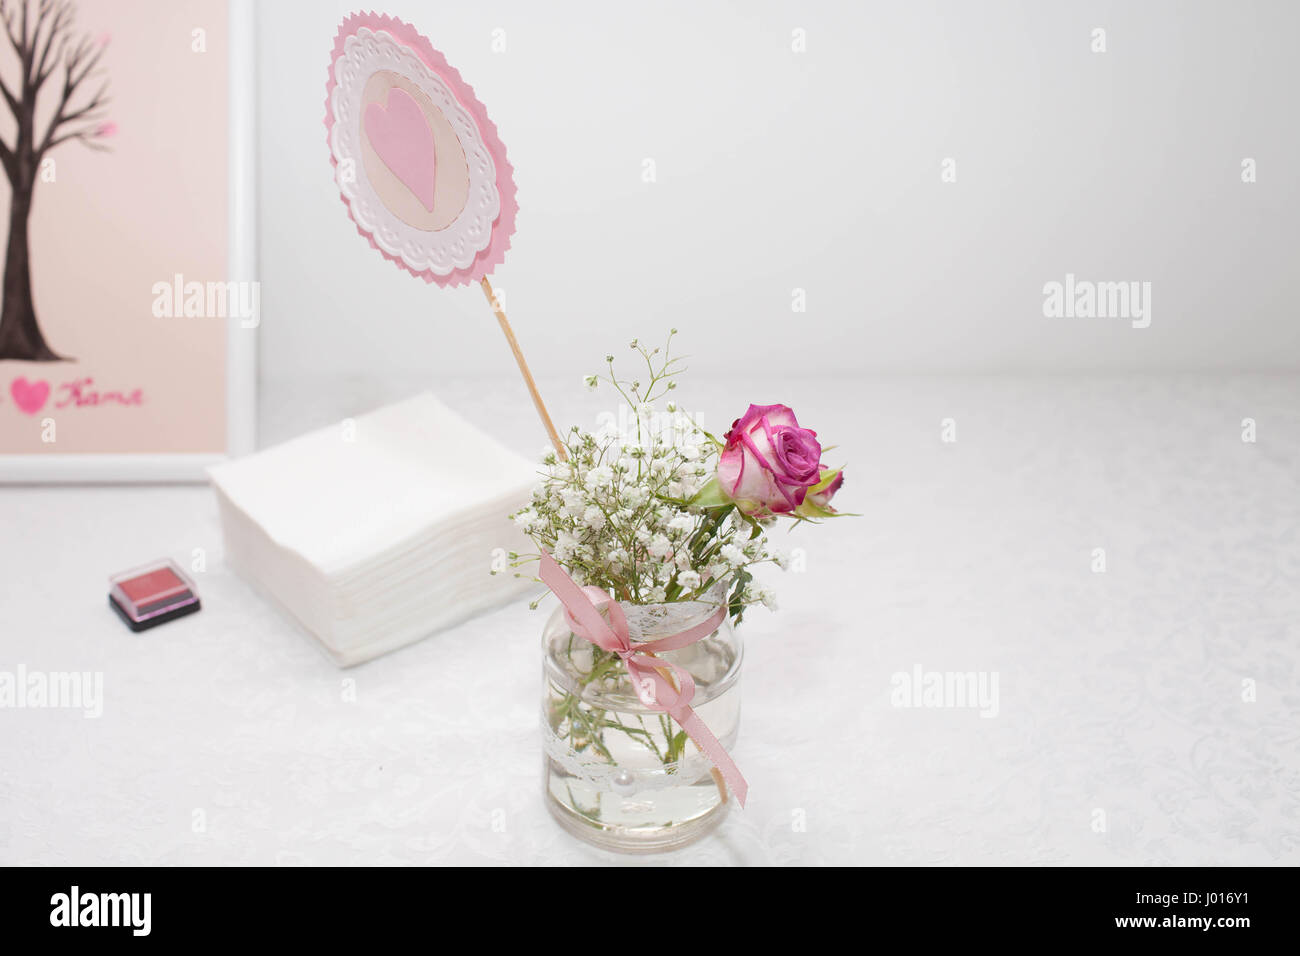 Jar with rose and baby's breath. Wedding decorations. Close-up Stock Photo